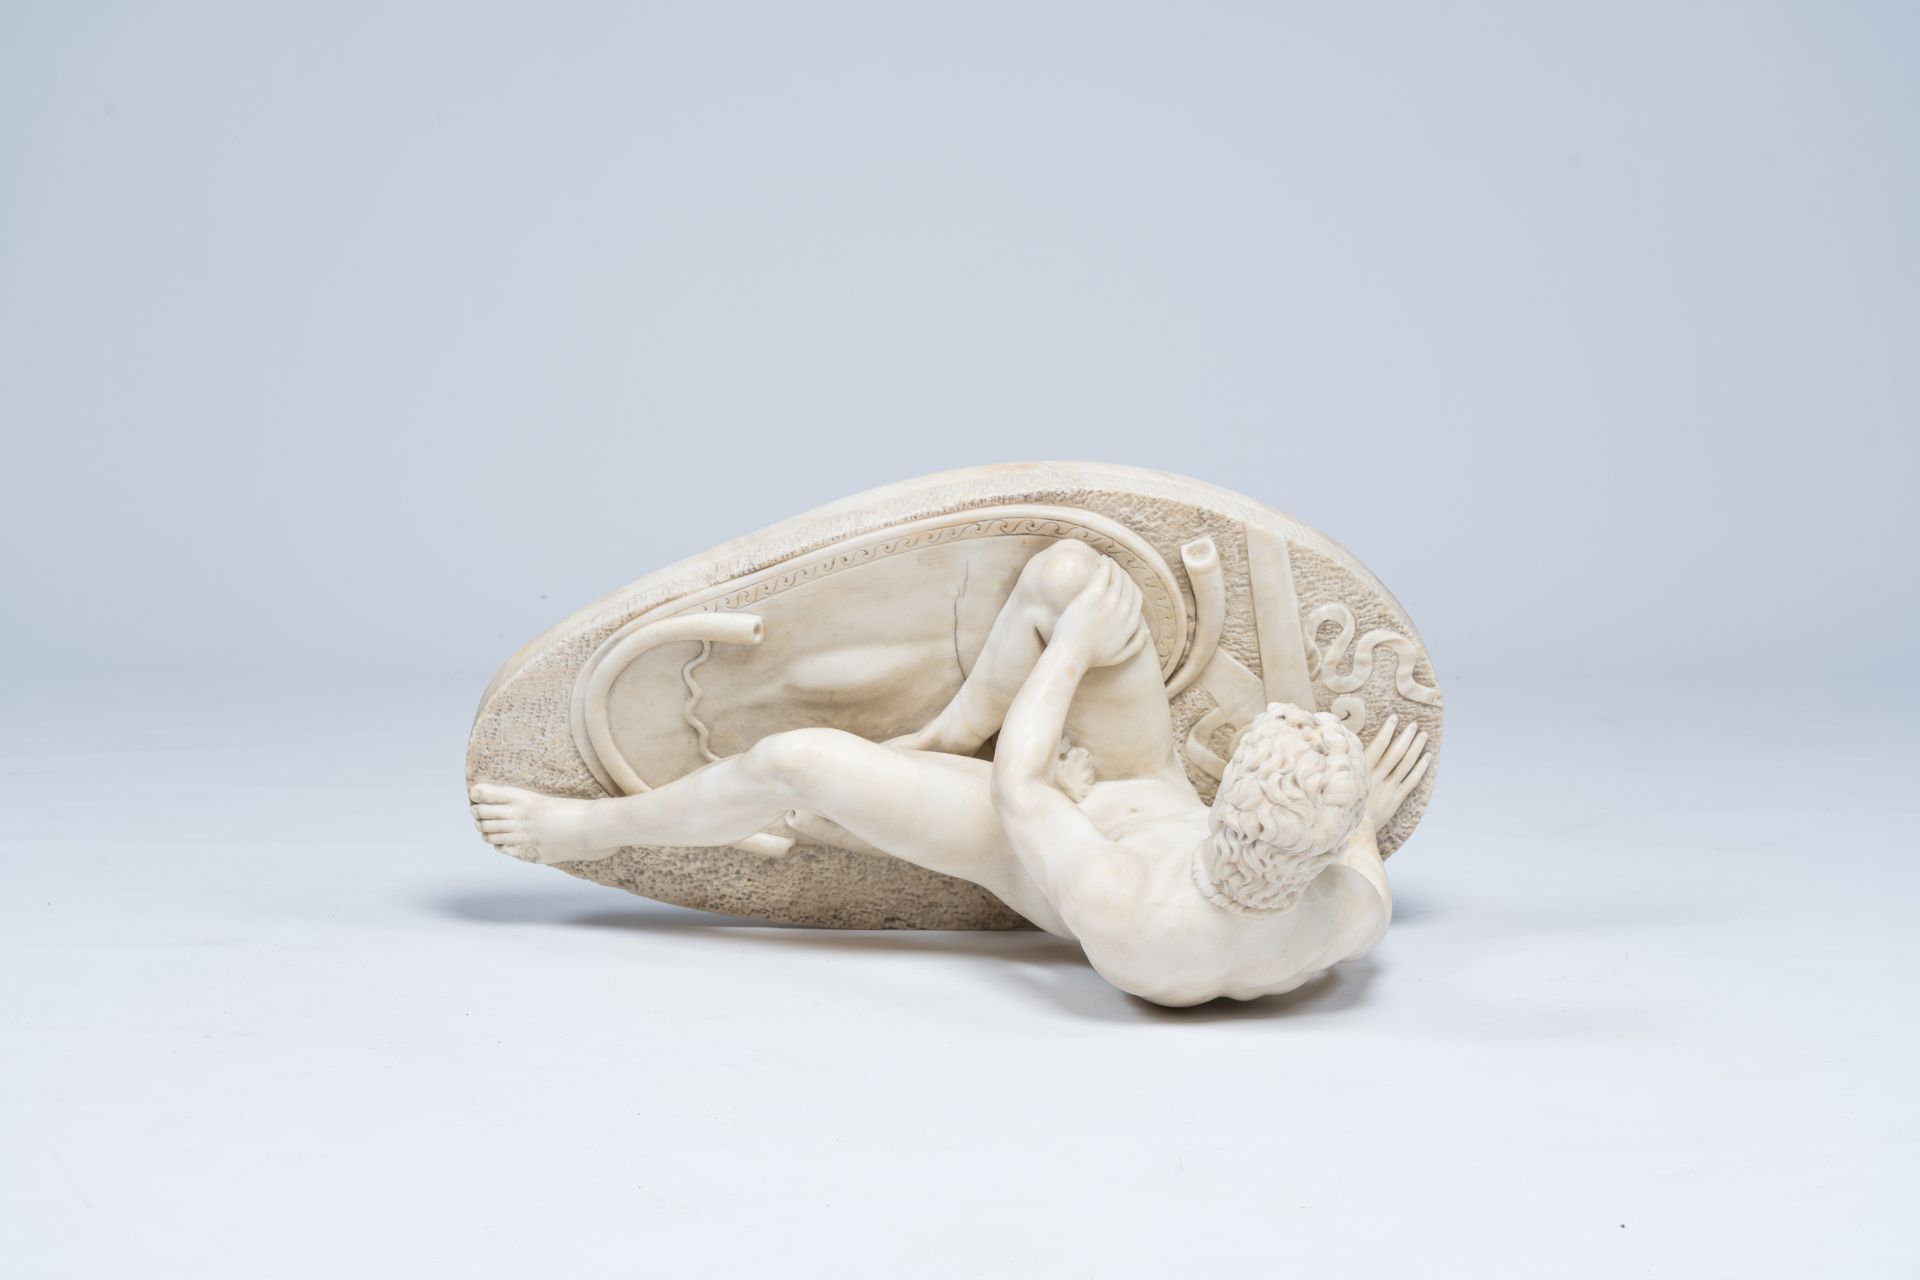 After the antique: The Dying Gaul, marble, 19th/20th C. - Image 6 of 7